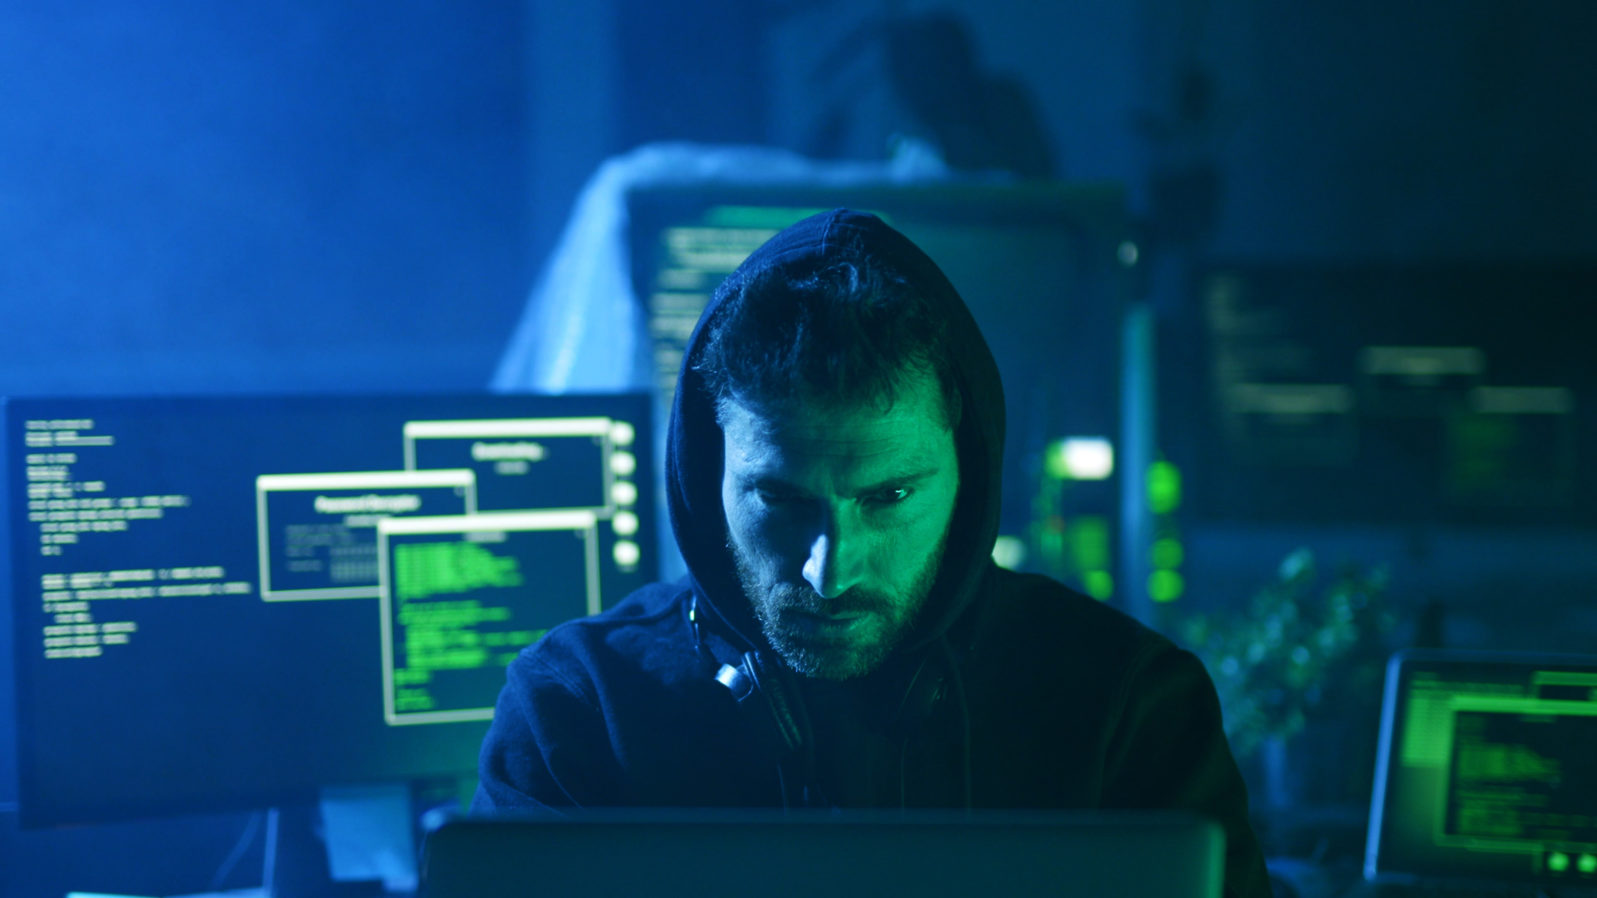 Portrait of insidious hacker organizing virus attack on corporate servers in hideout place. Serious man looking at camera sitting at desk with multiple displays.